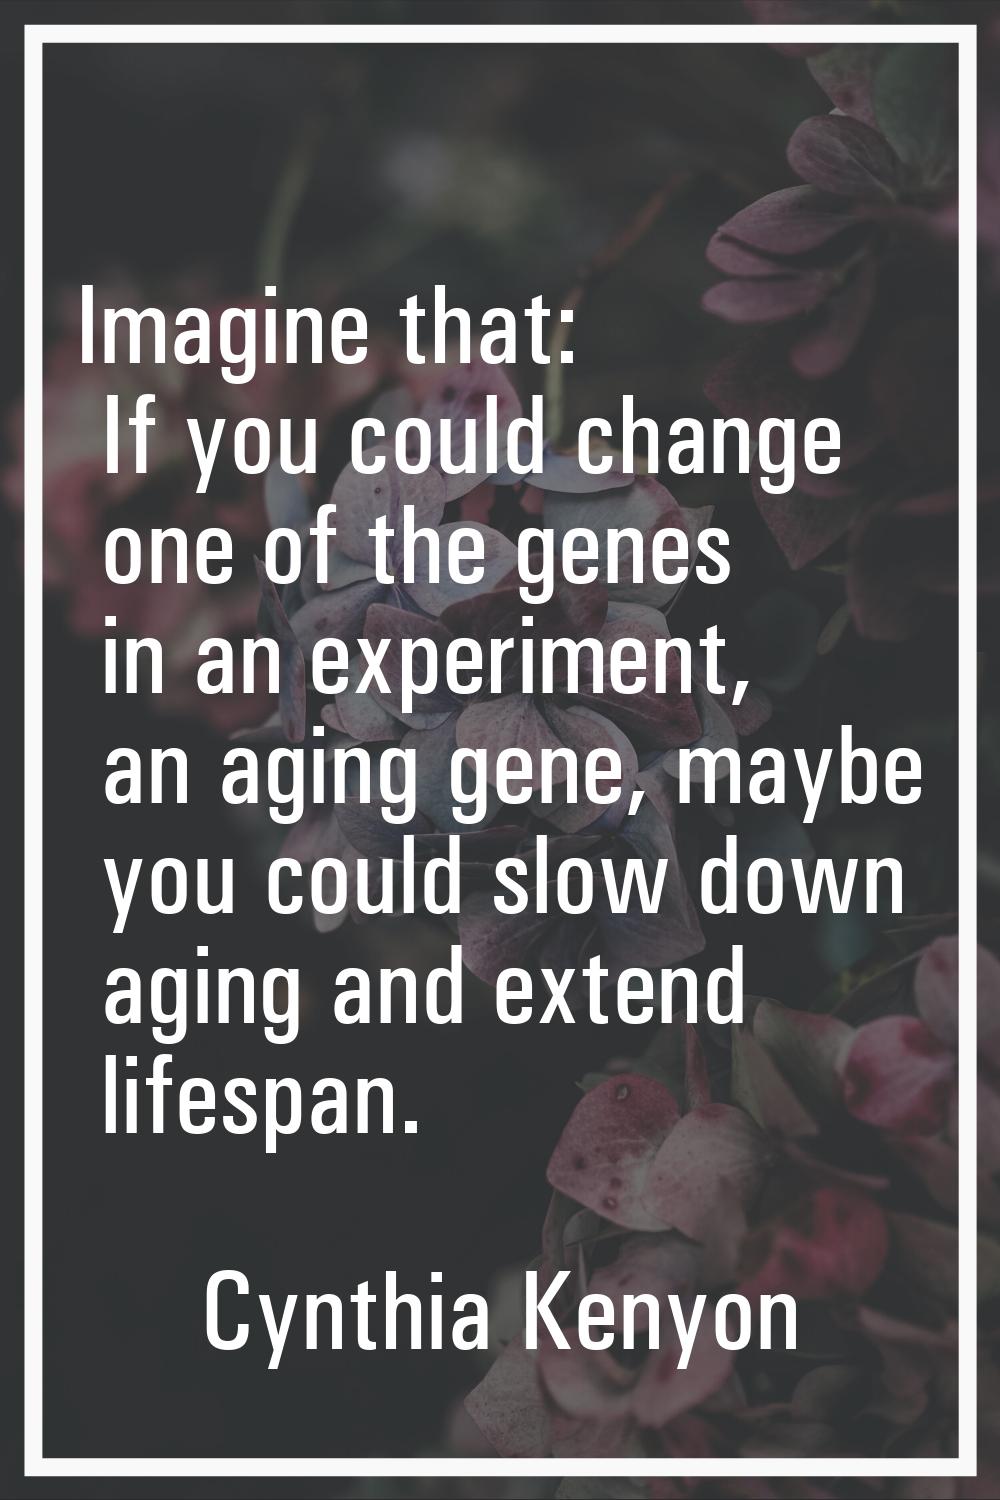 Imagine that: If you could change one of the genes in an experiment, an aging gene, maybe you could